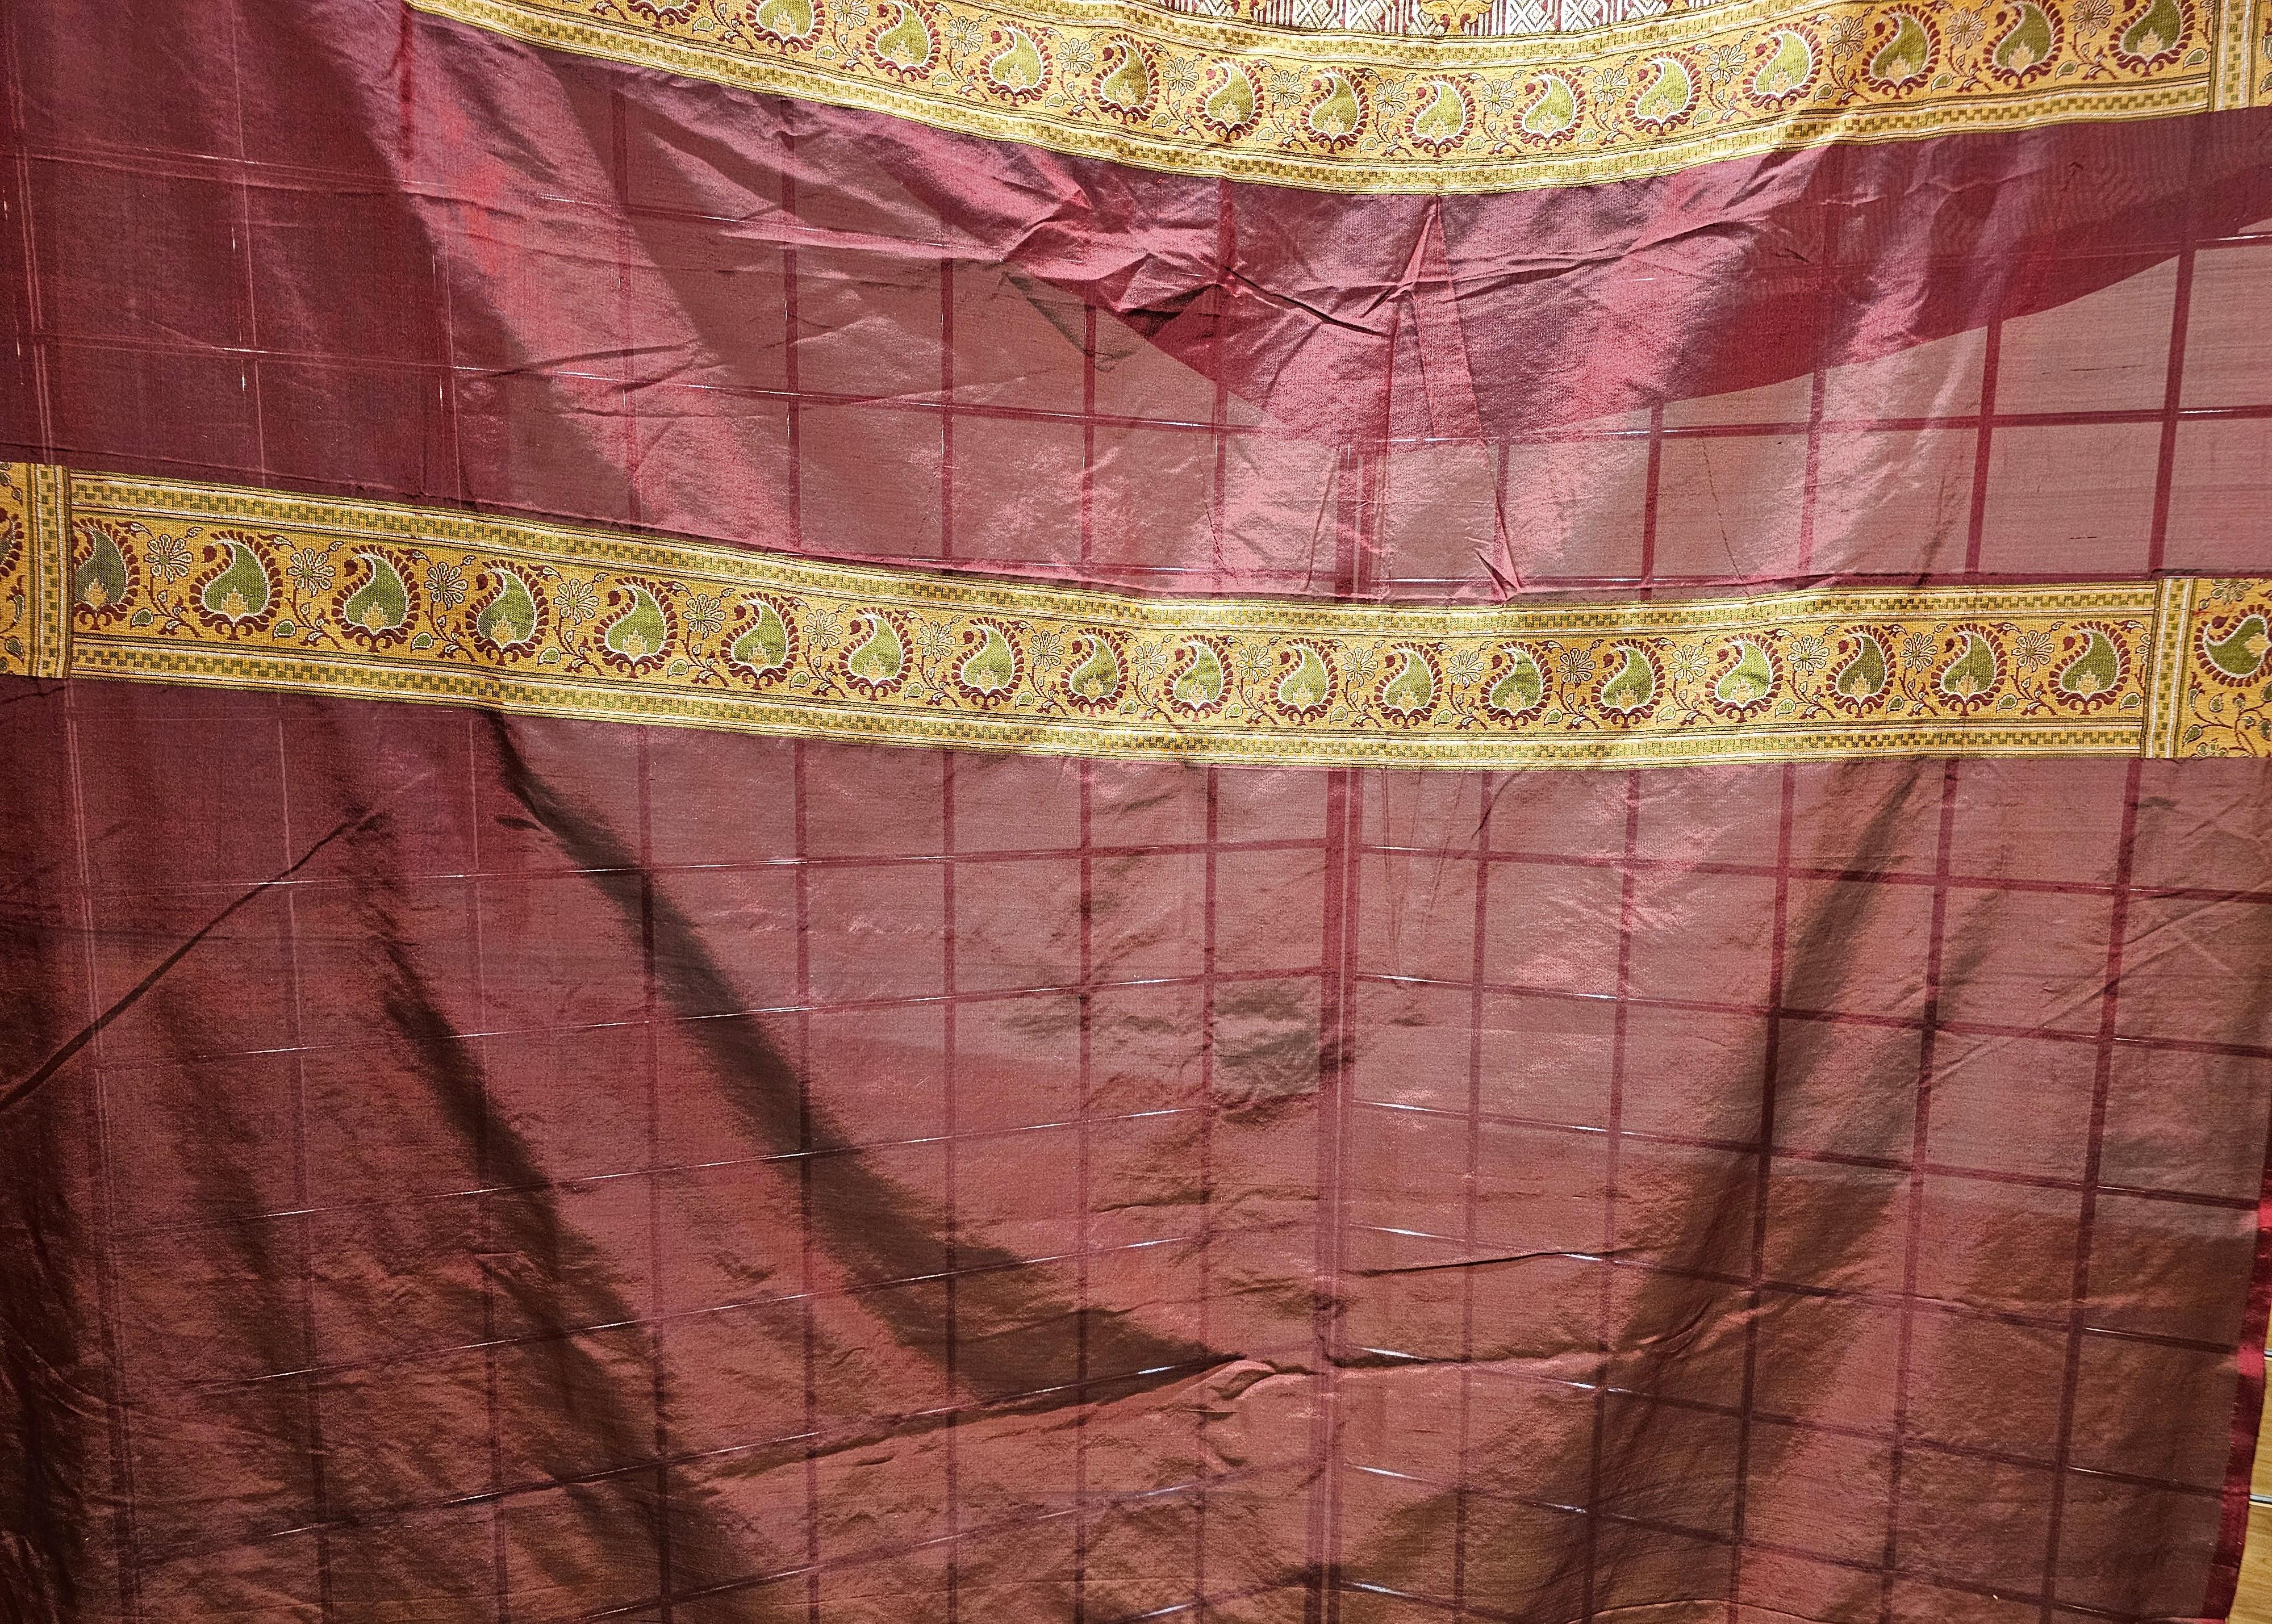 Vintage Brocade Silk Textile in Paisley Pattern in Burgundy, Pale Green, Gold In Good Condition For Sale In Barrington, IL